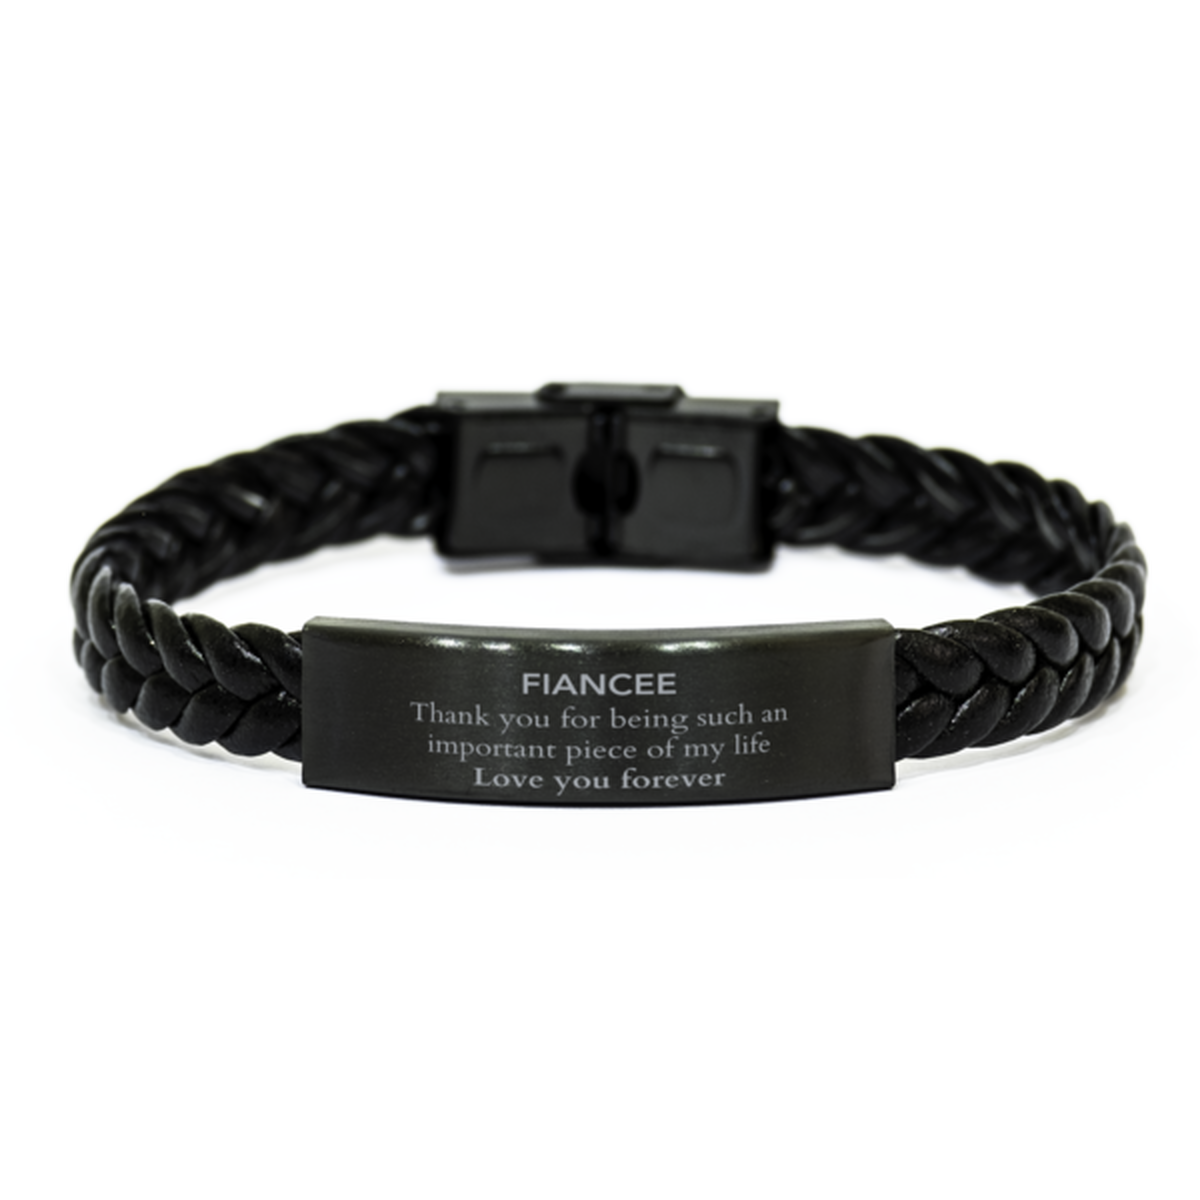 Appropriate Fiancee Braided Leather Bracelet Epic Birthday Gifts for Fiancee Thank you for being such an important piece of my life Fiancee Christmas Mothers Fathers Day